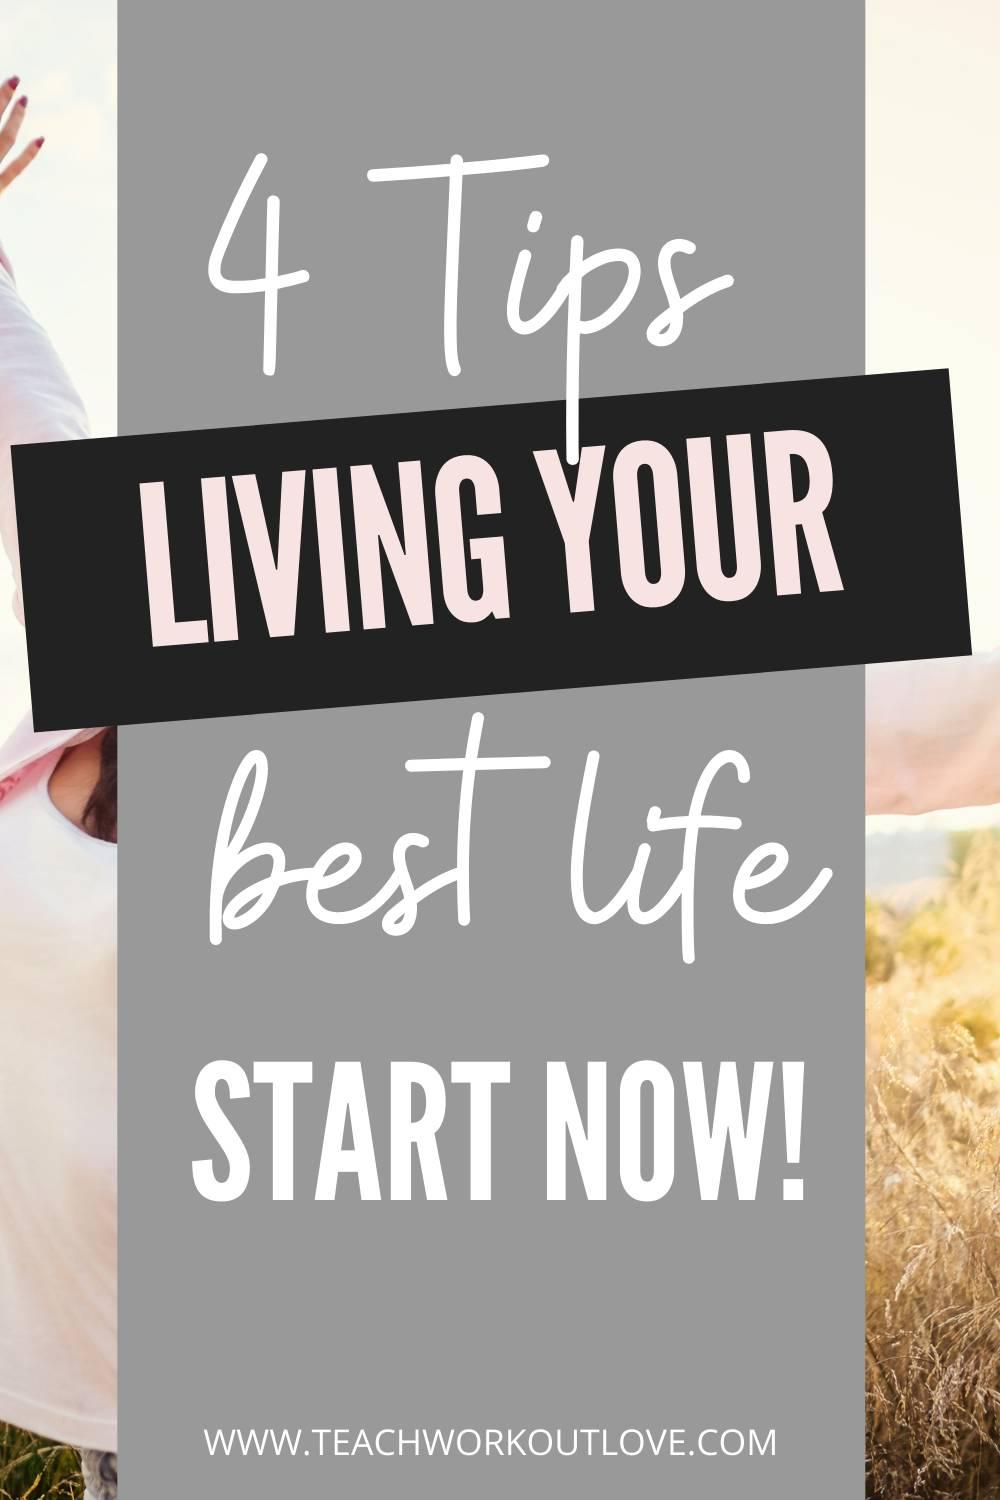 A life well lived is more valuable than anything money can buy. Here's easy and helpful 4 tips to living your best life.